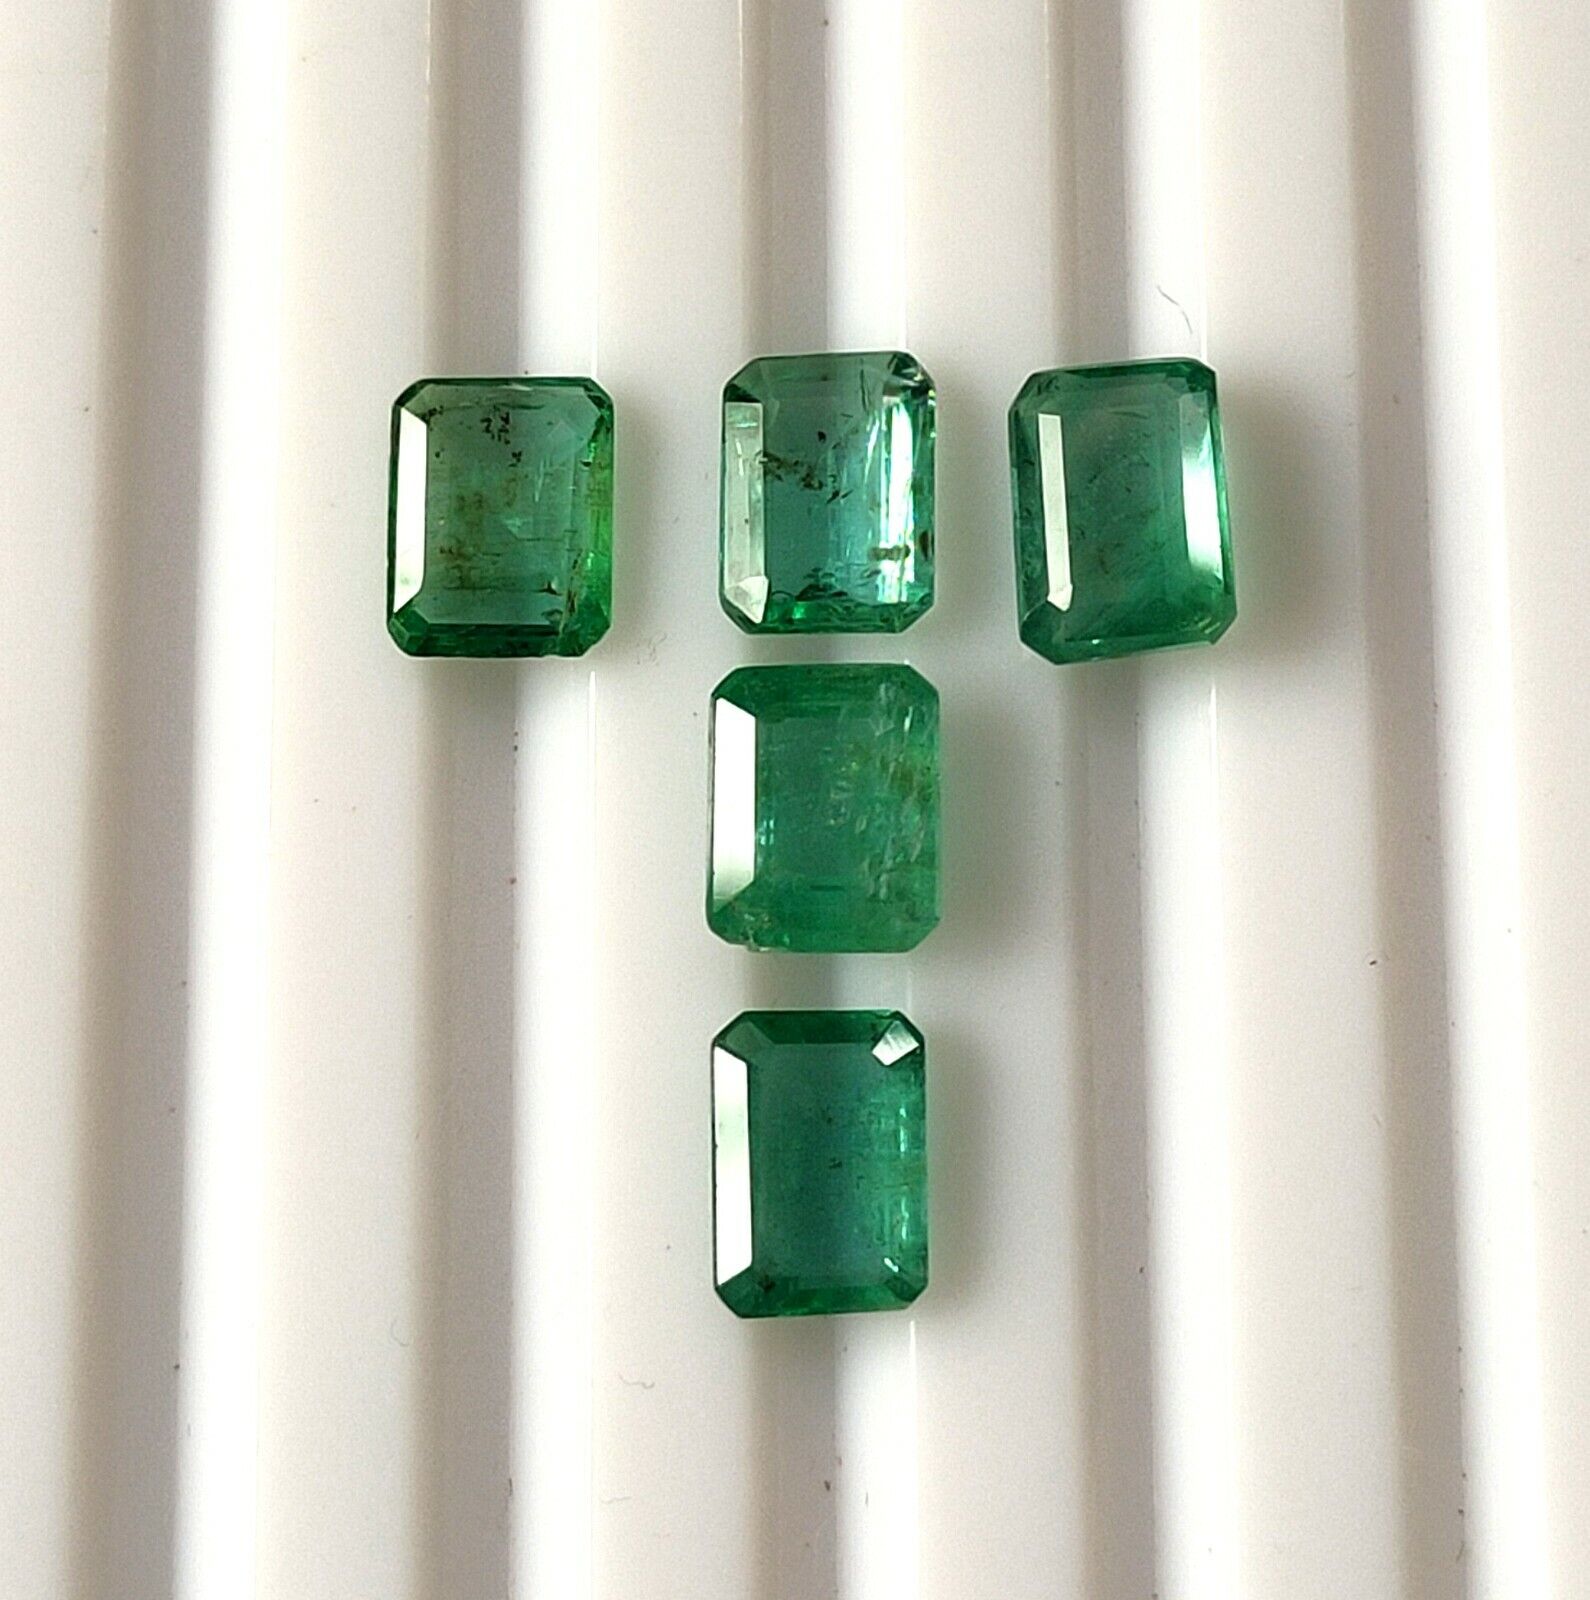 7X5 MM Octagon Shape Natural Faceted Zambian Emerald Loose Gemstone 5 Pieces Lot